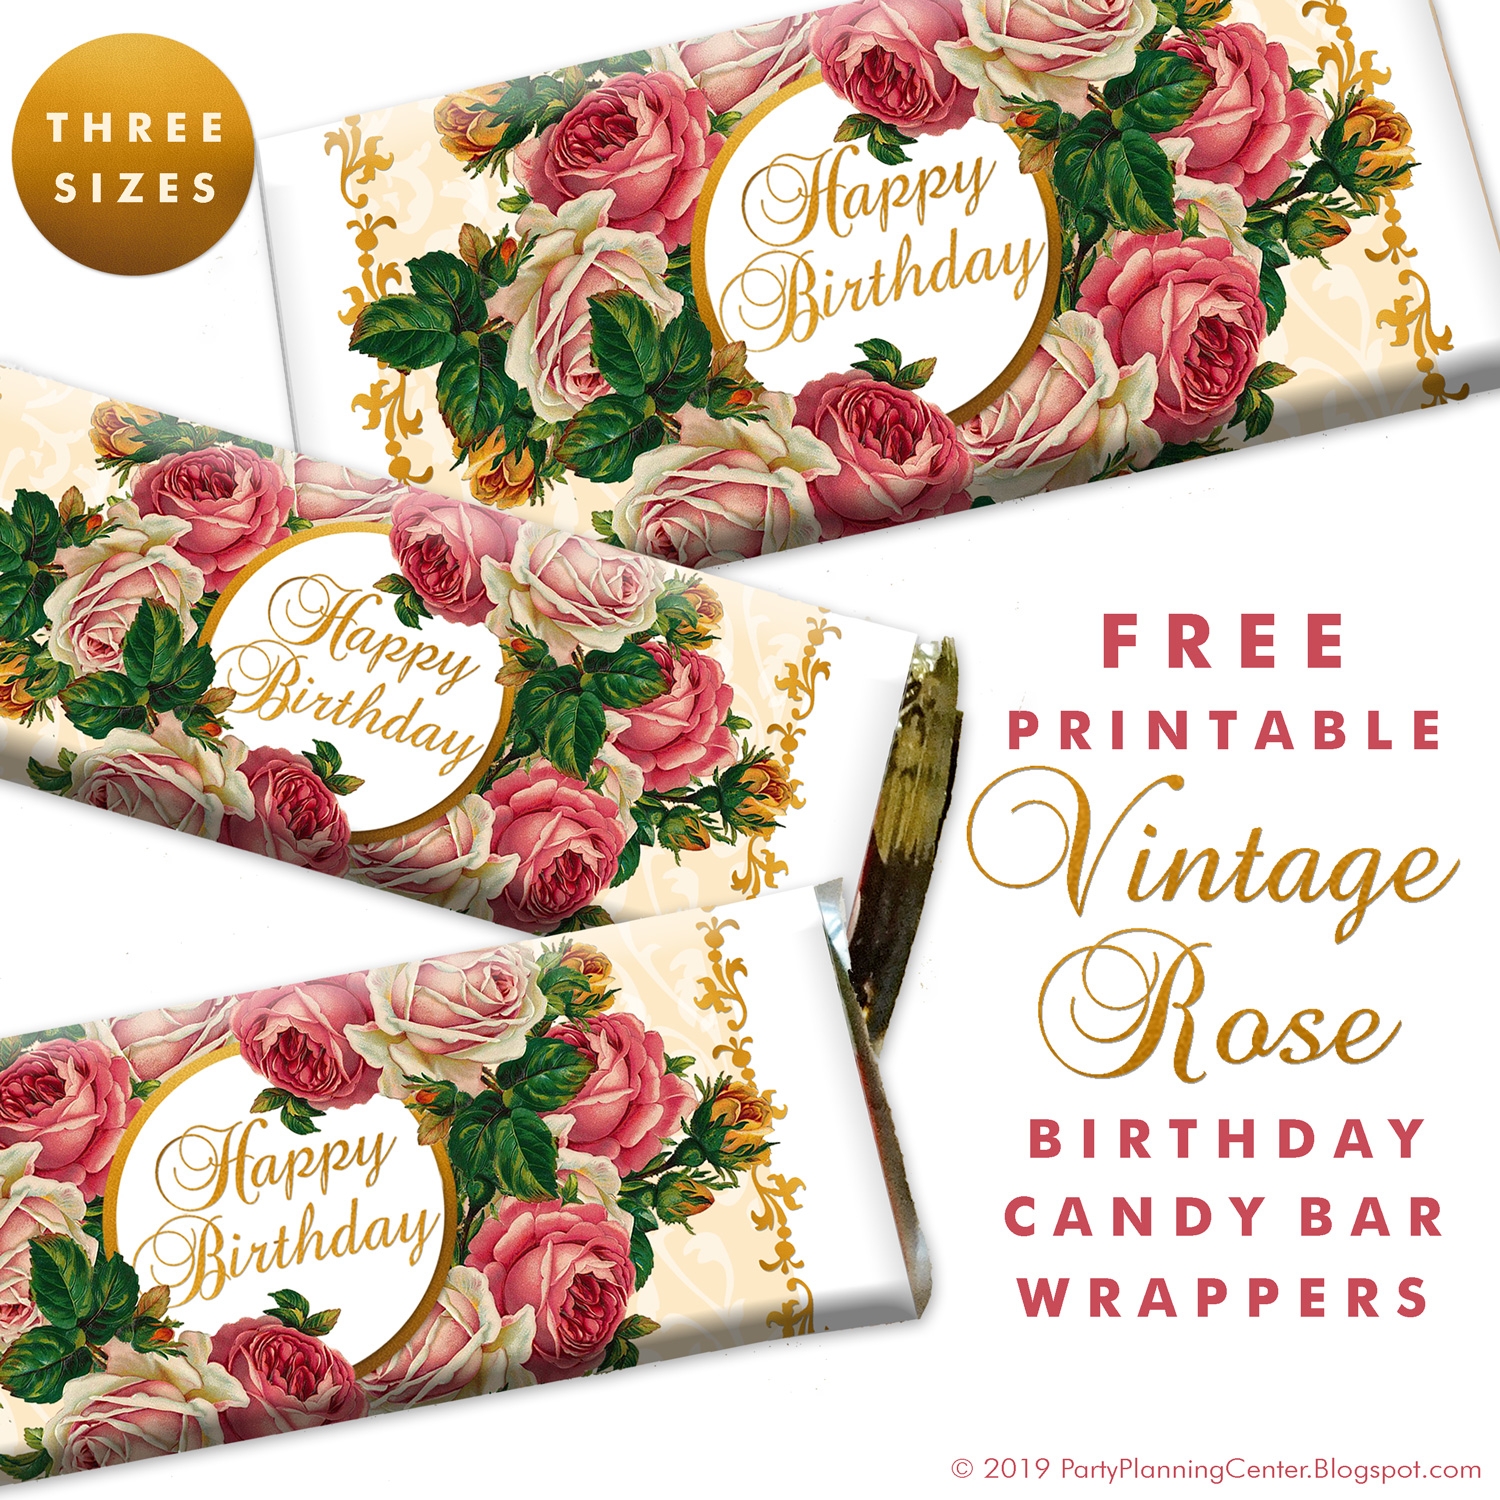 Party Planning Free Printable Birthday Candy Wrappers - Free Printable Birthday Candy Bar Wrappers